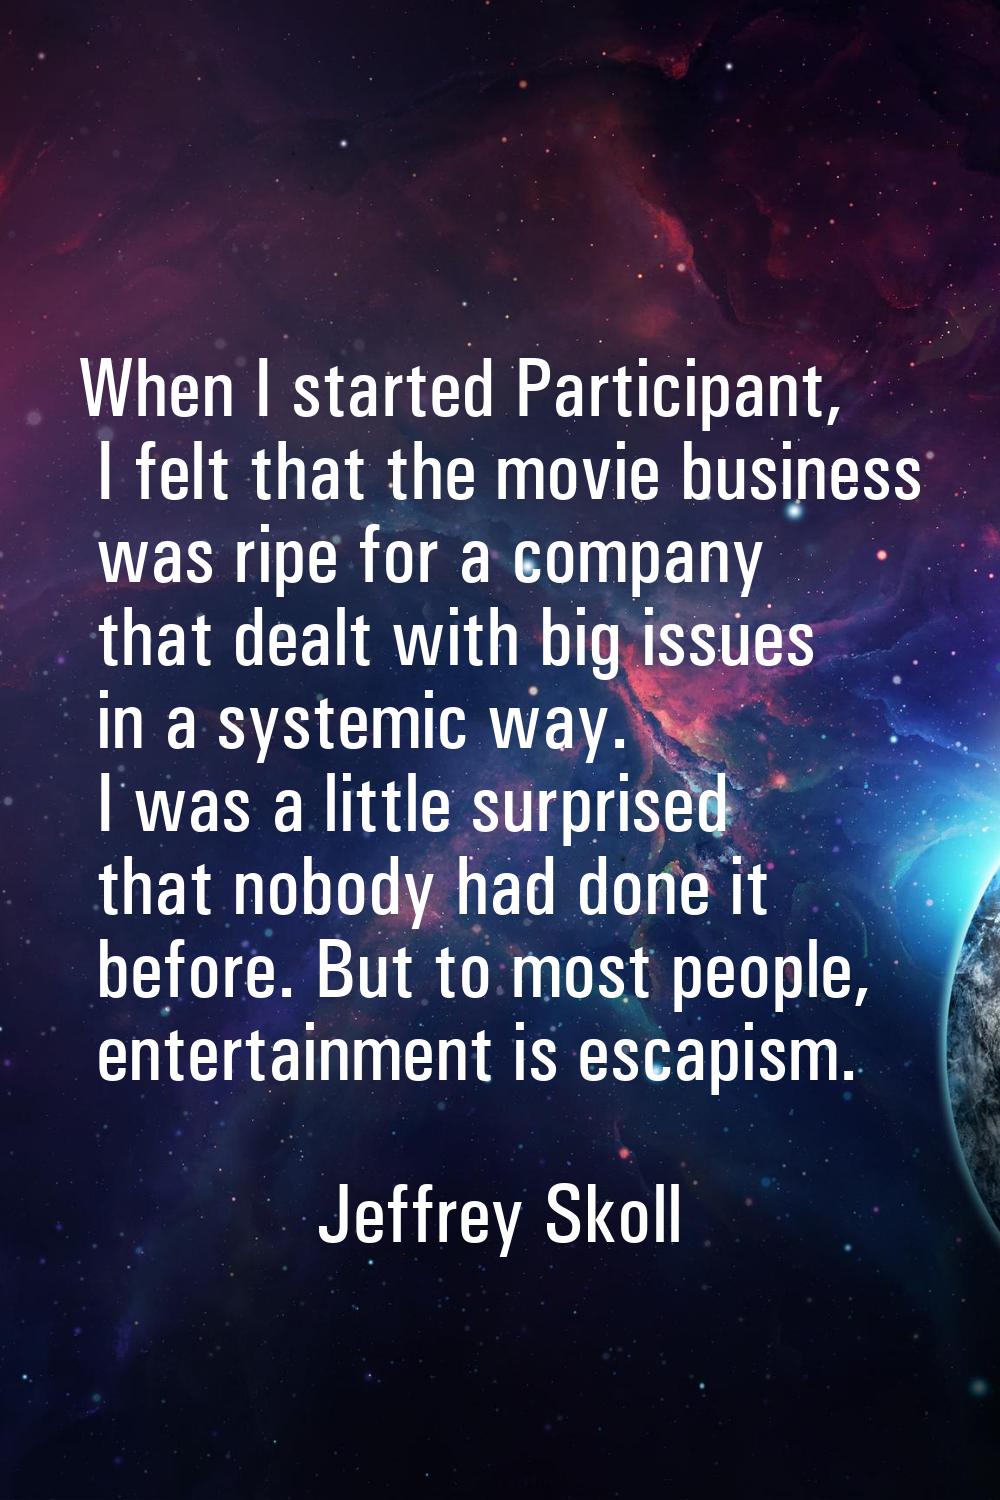 When I started Participant, I felt that the movie business was ripe for a company that dealt with b